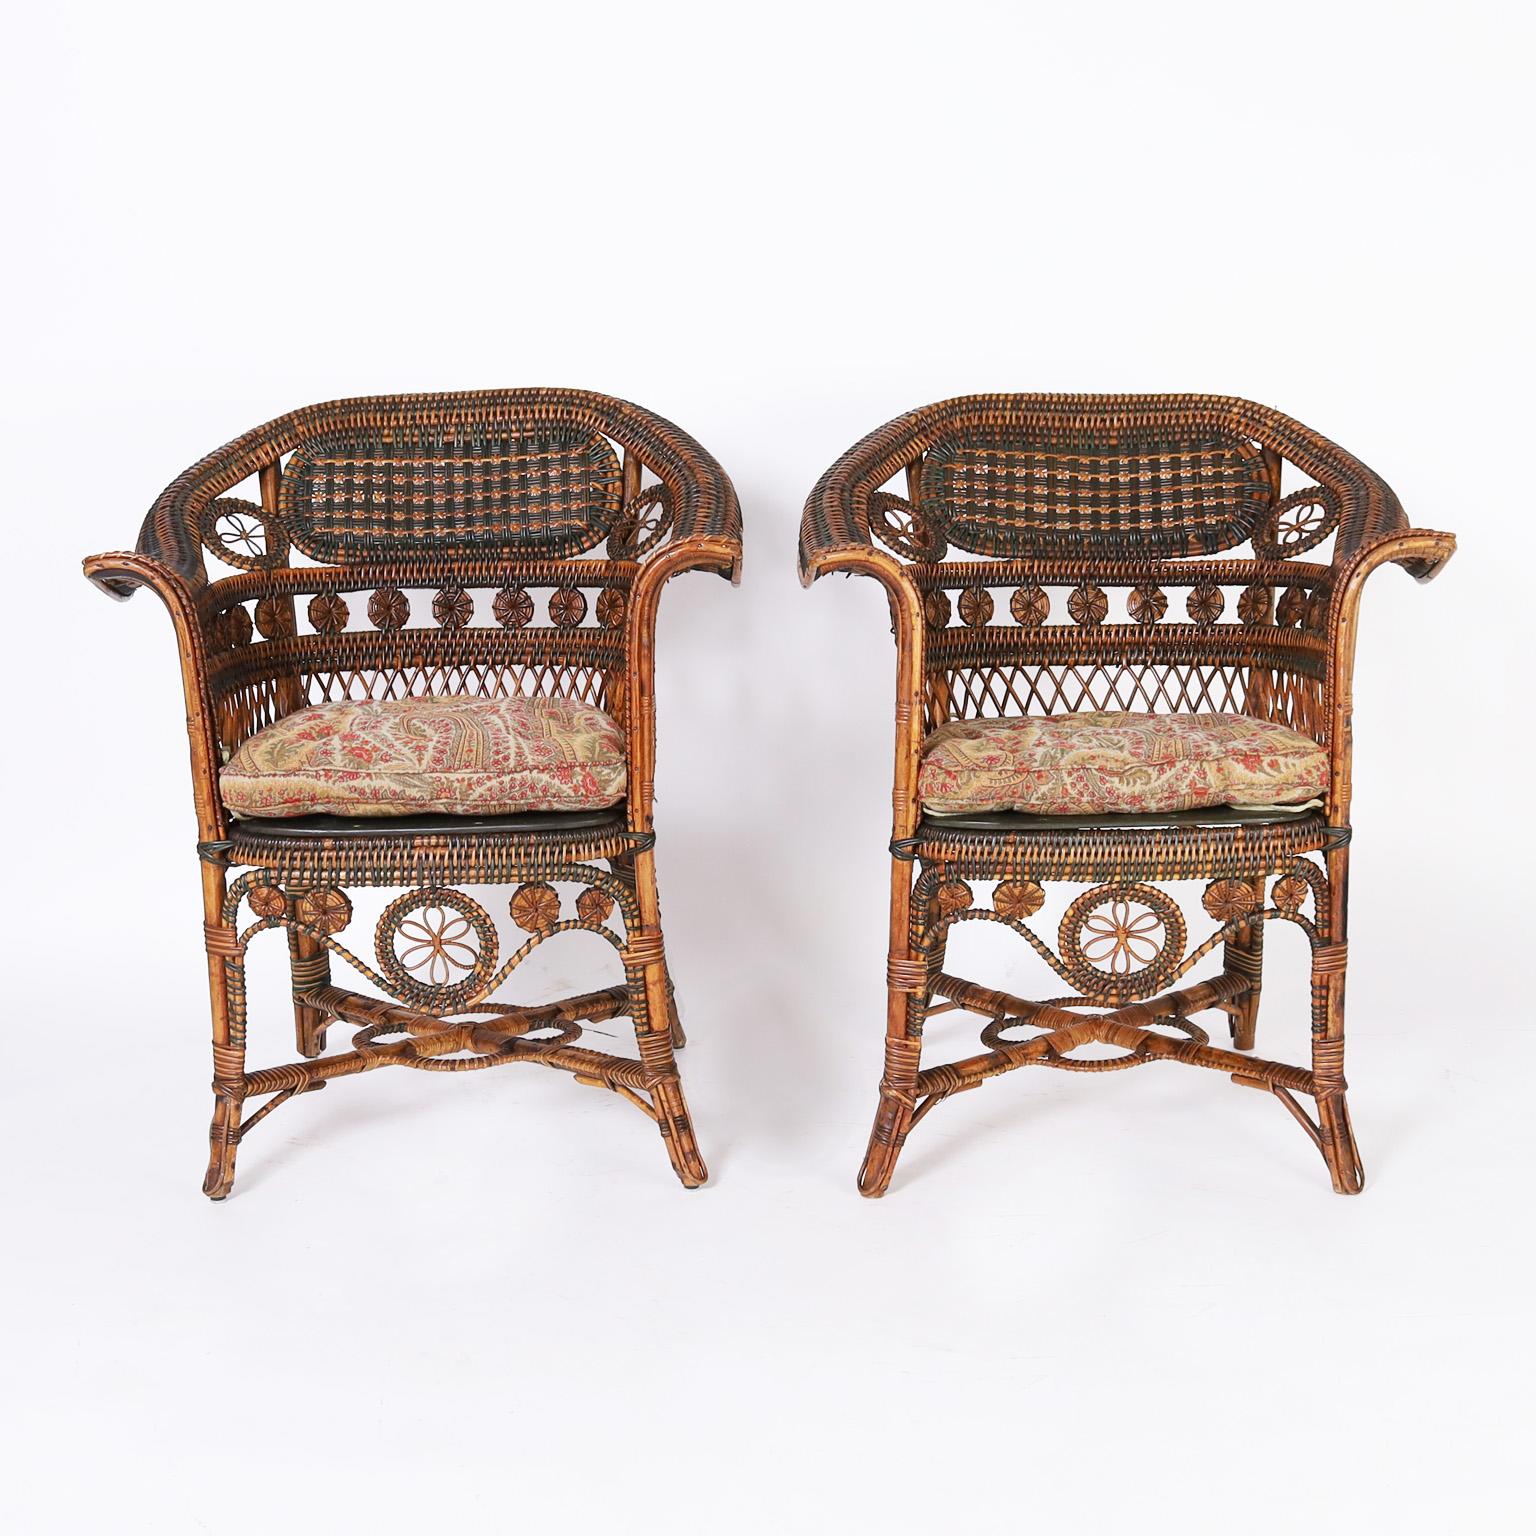 Impressive pair of antique French rattan and reed cafe chairs with bent wood frames decorated with painted and natural reed wrapped rattan in a graceful form with sturdy cross stretchers. Signed Pierre Leroux.